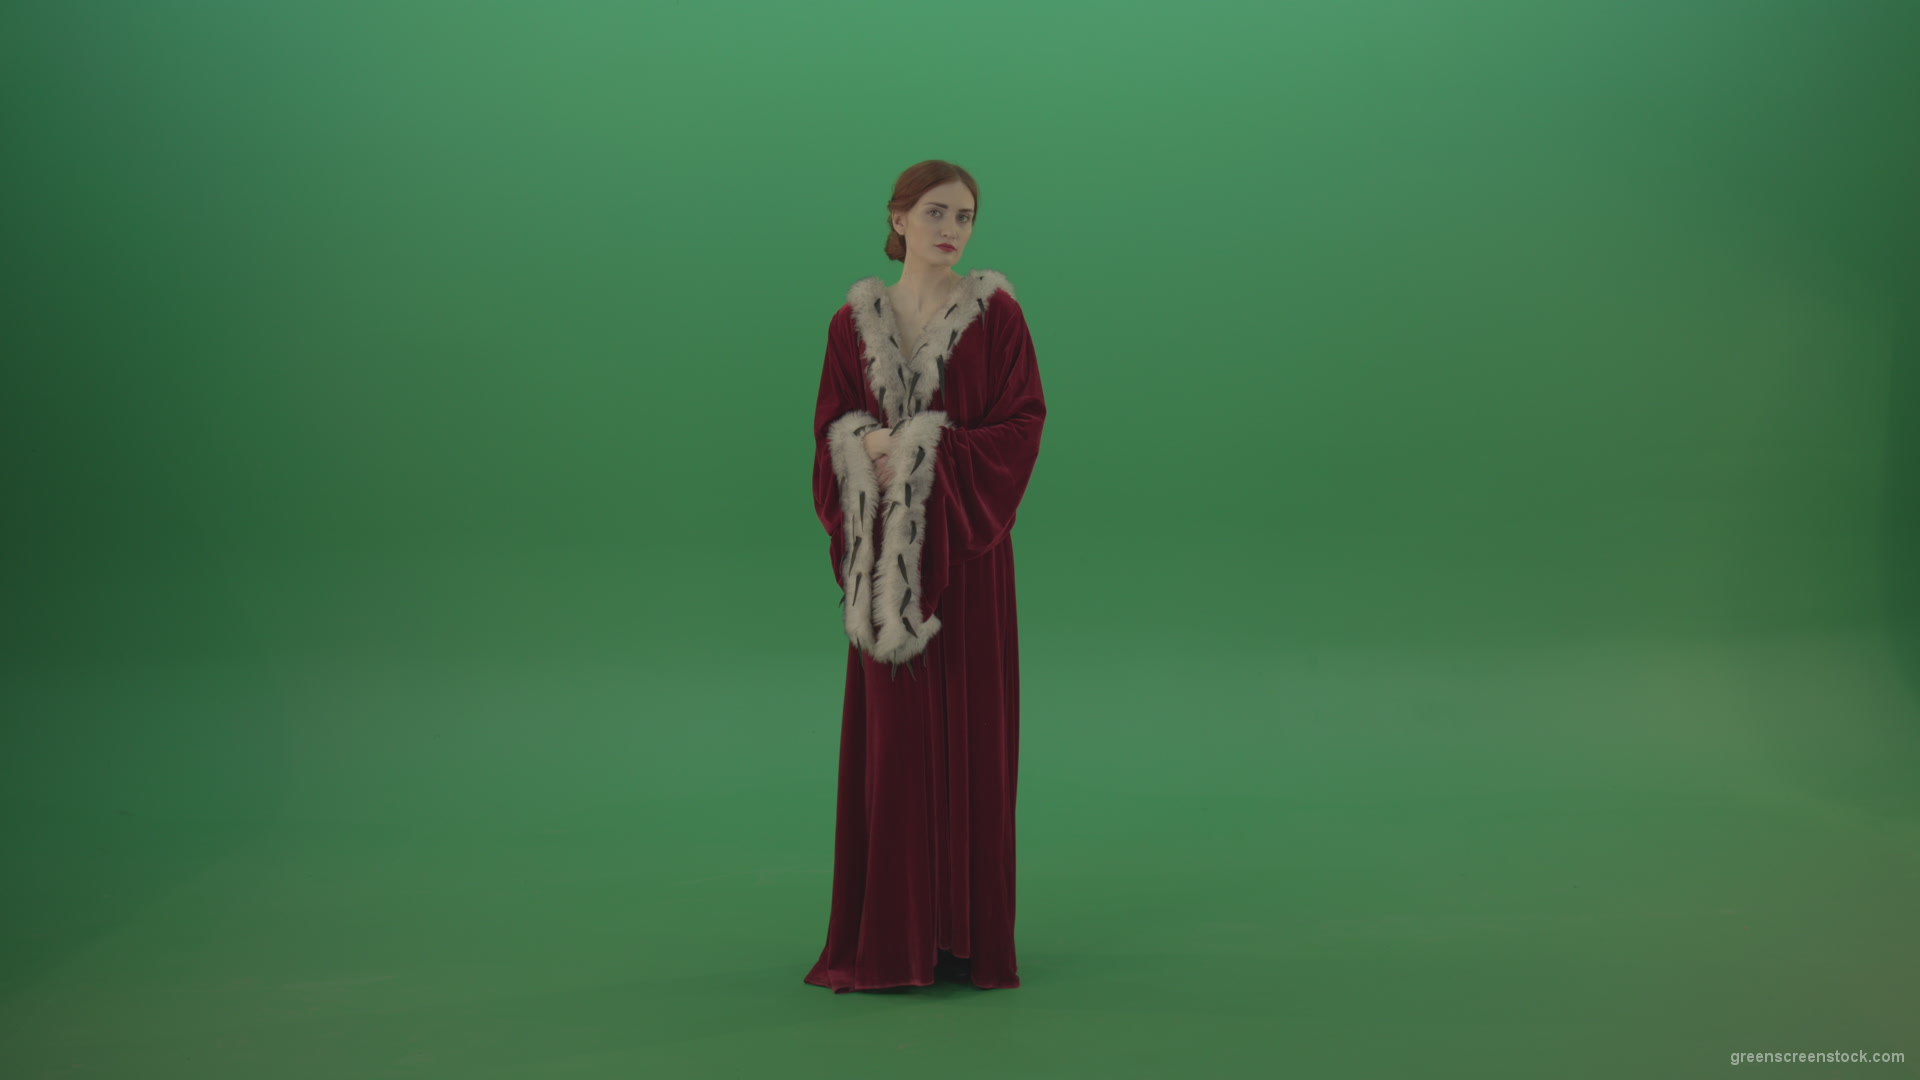 Elegant-woman-princess-with-light-movements-shows-her-beauty-dressed-in-red-cloak-on-a-green-background_001 Green Screen Stock